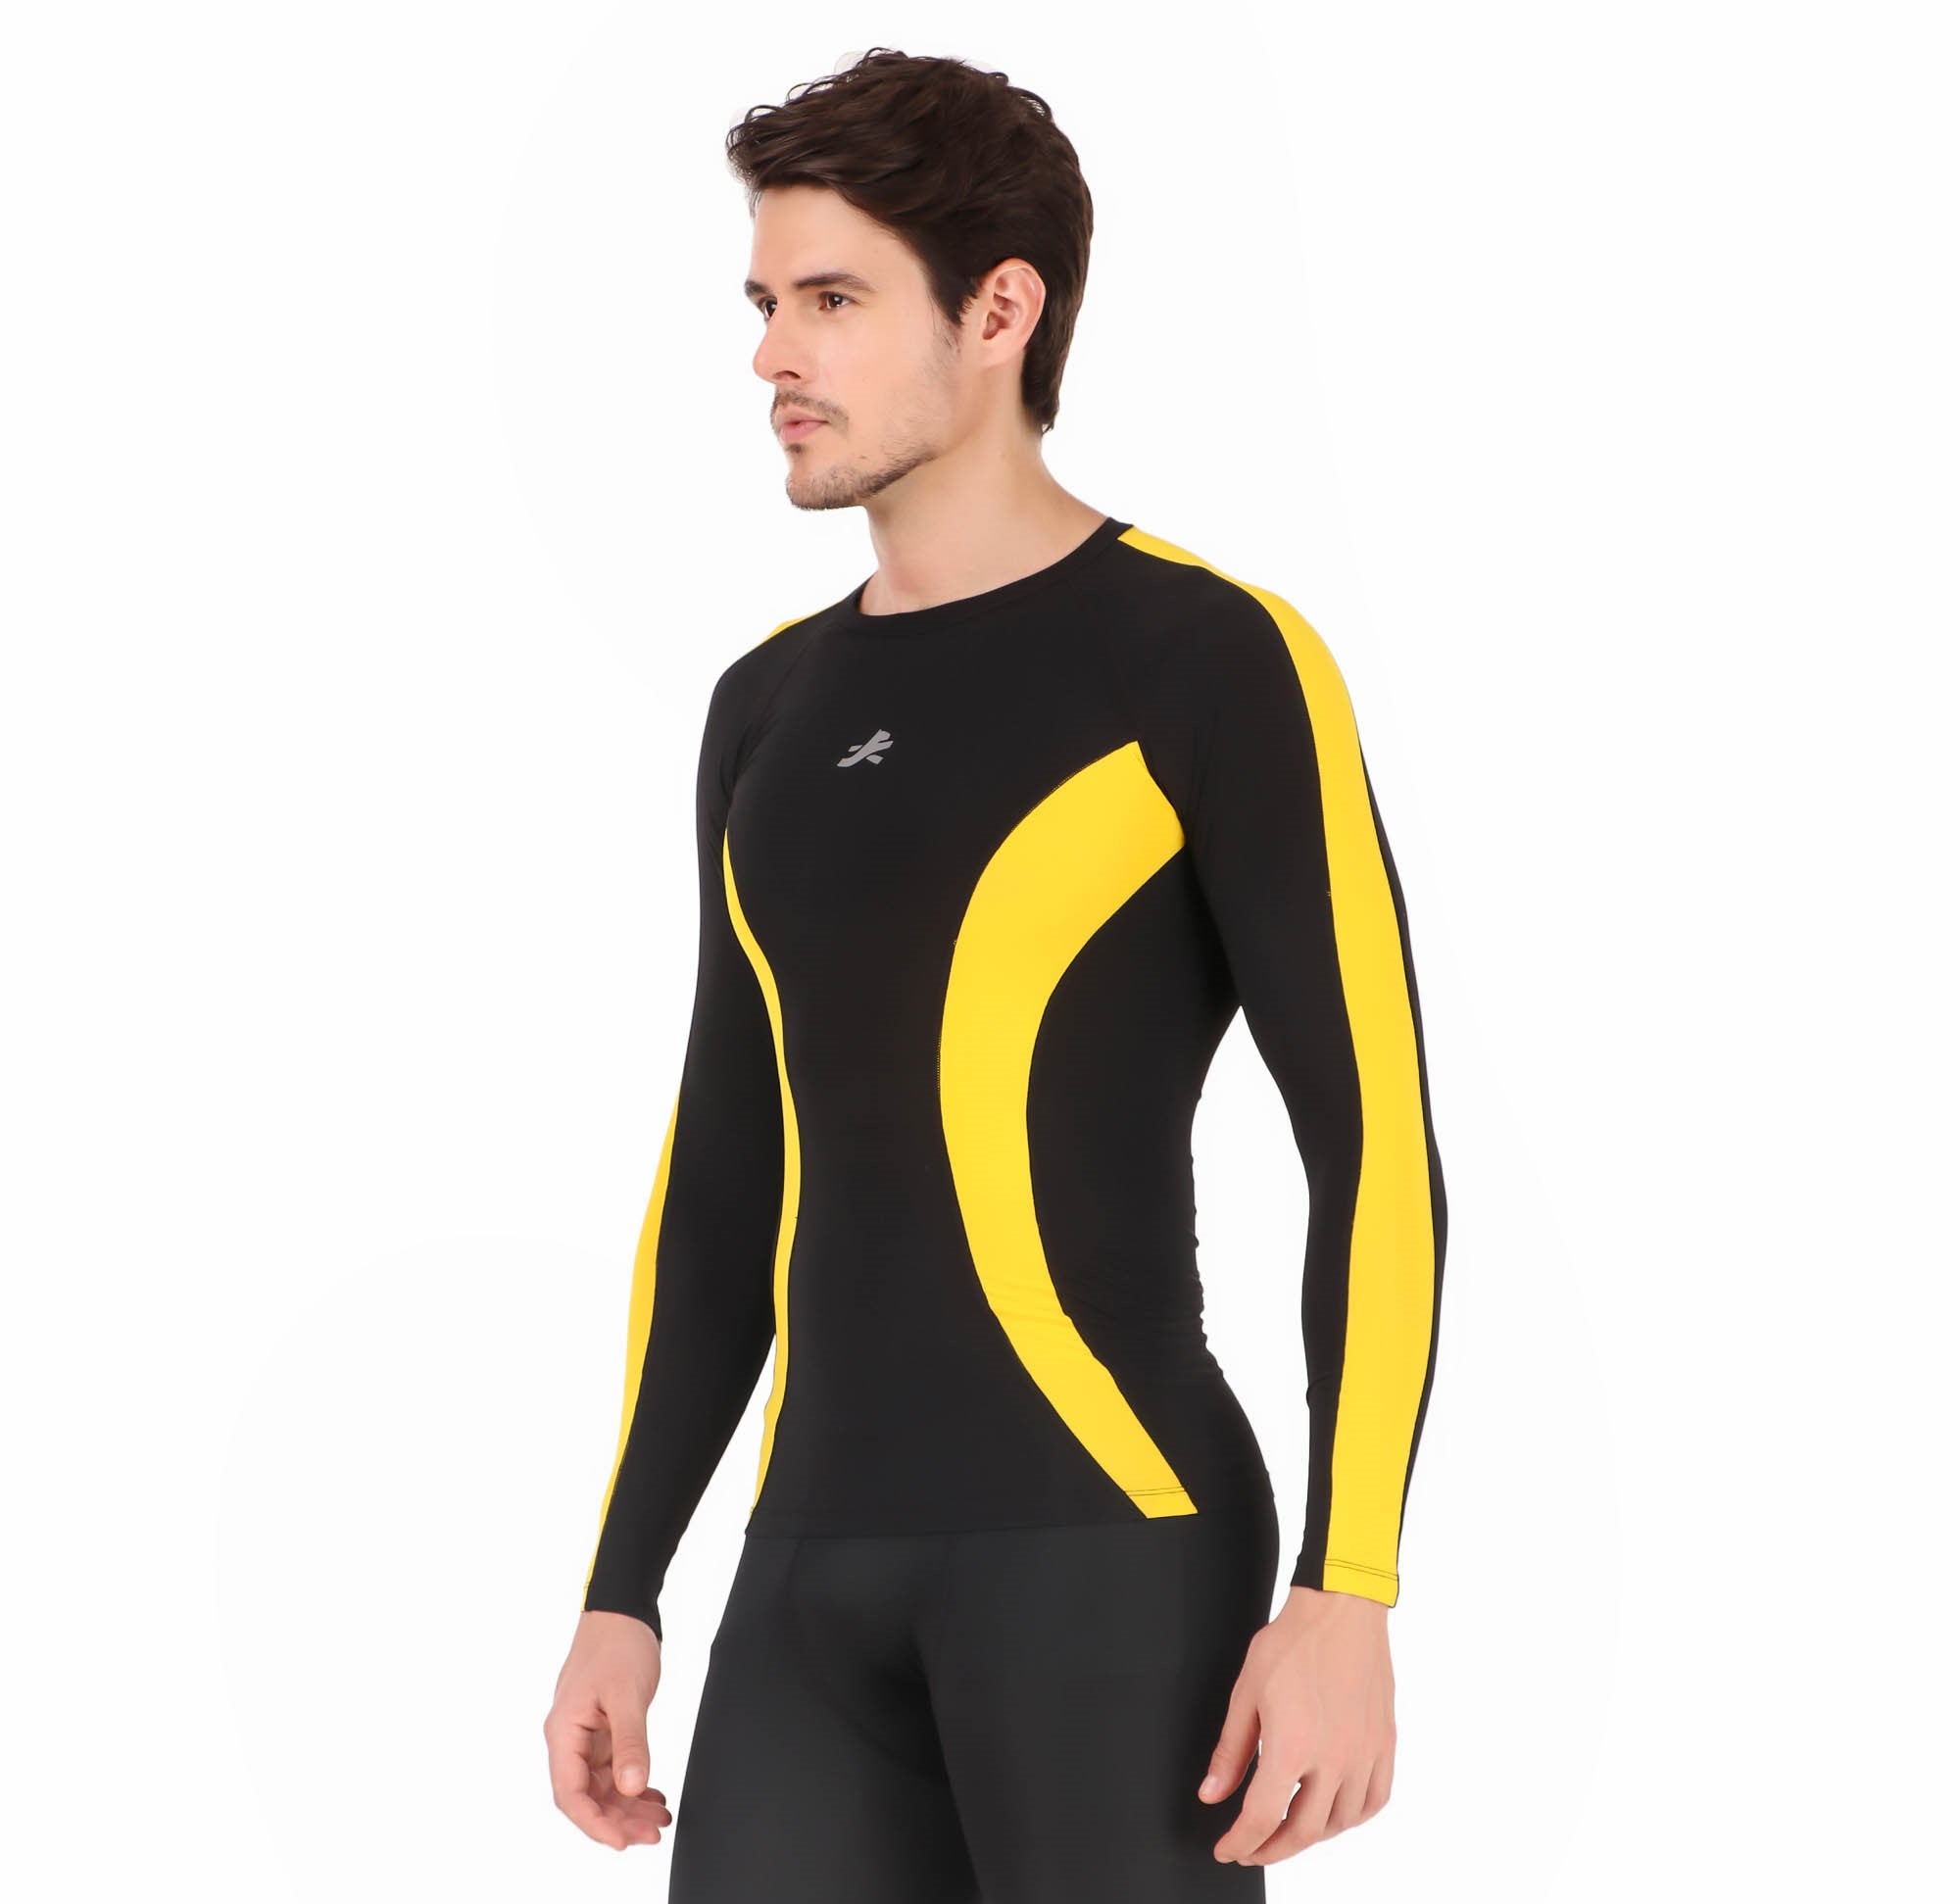 ReDesign Nylon Compression Top Full Sleeve (BLACK/YELLOW)